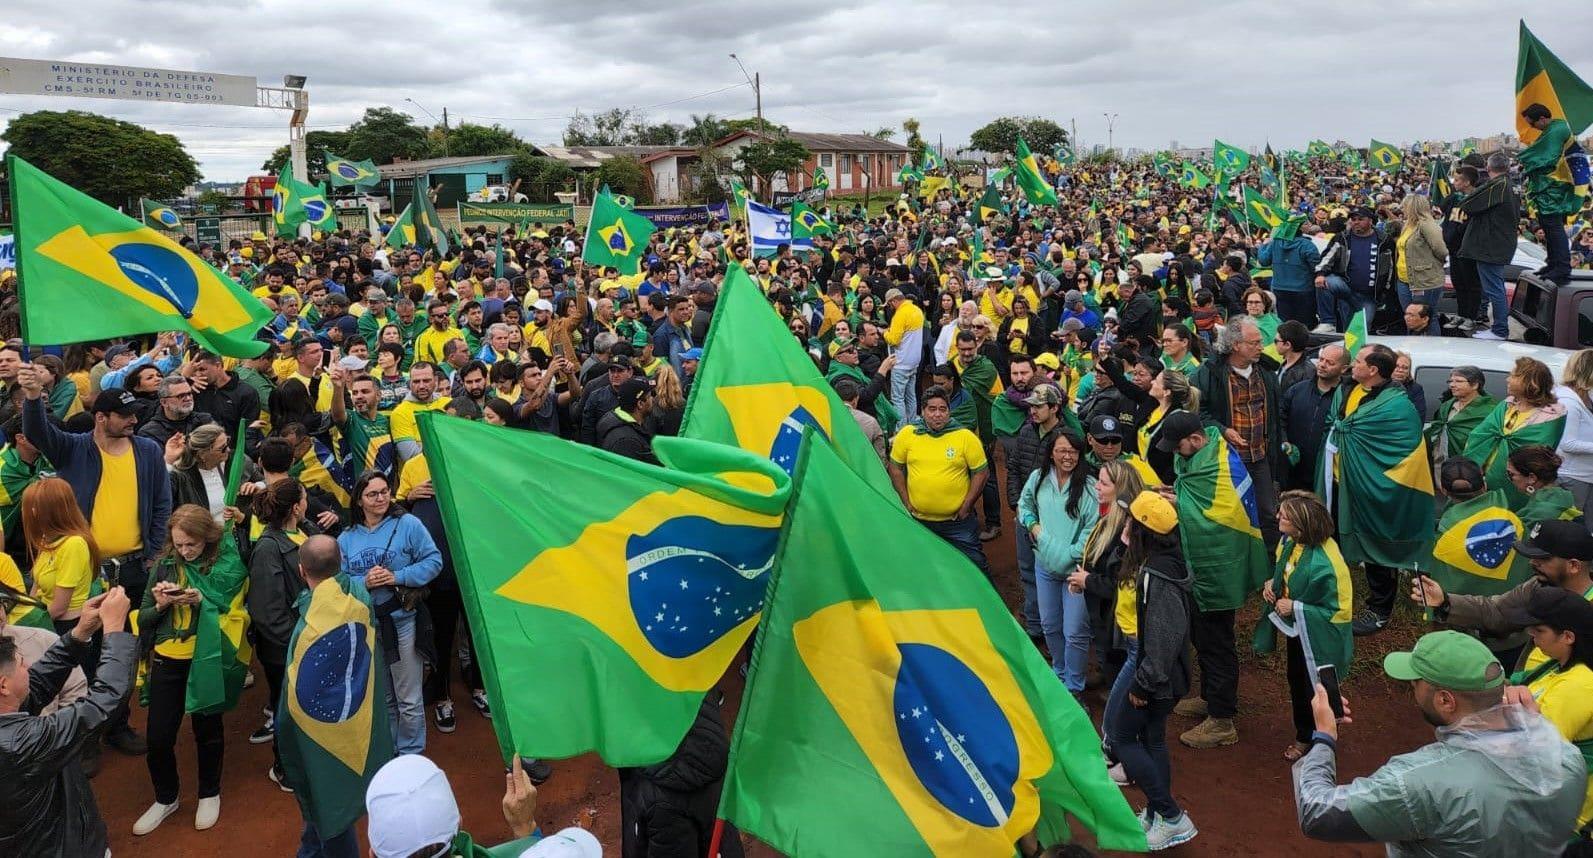 'We are here because we believe in saving Brazil from socialism'